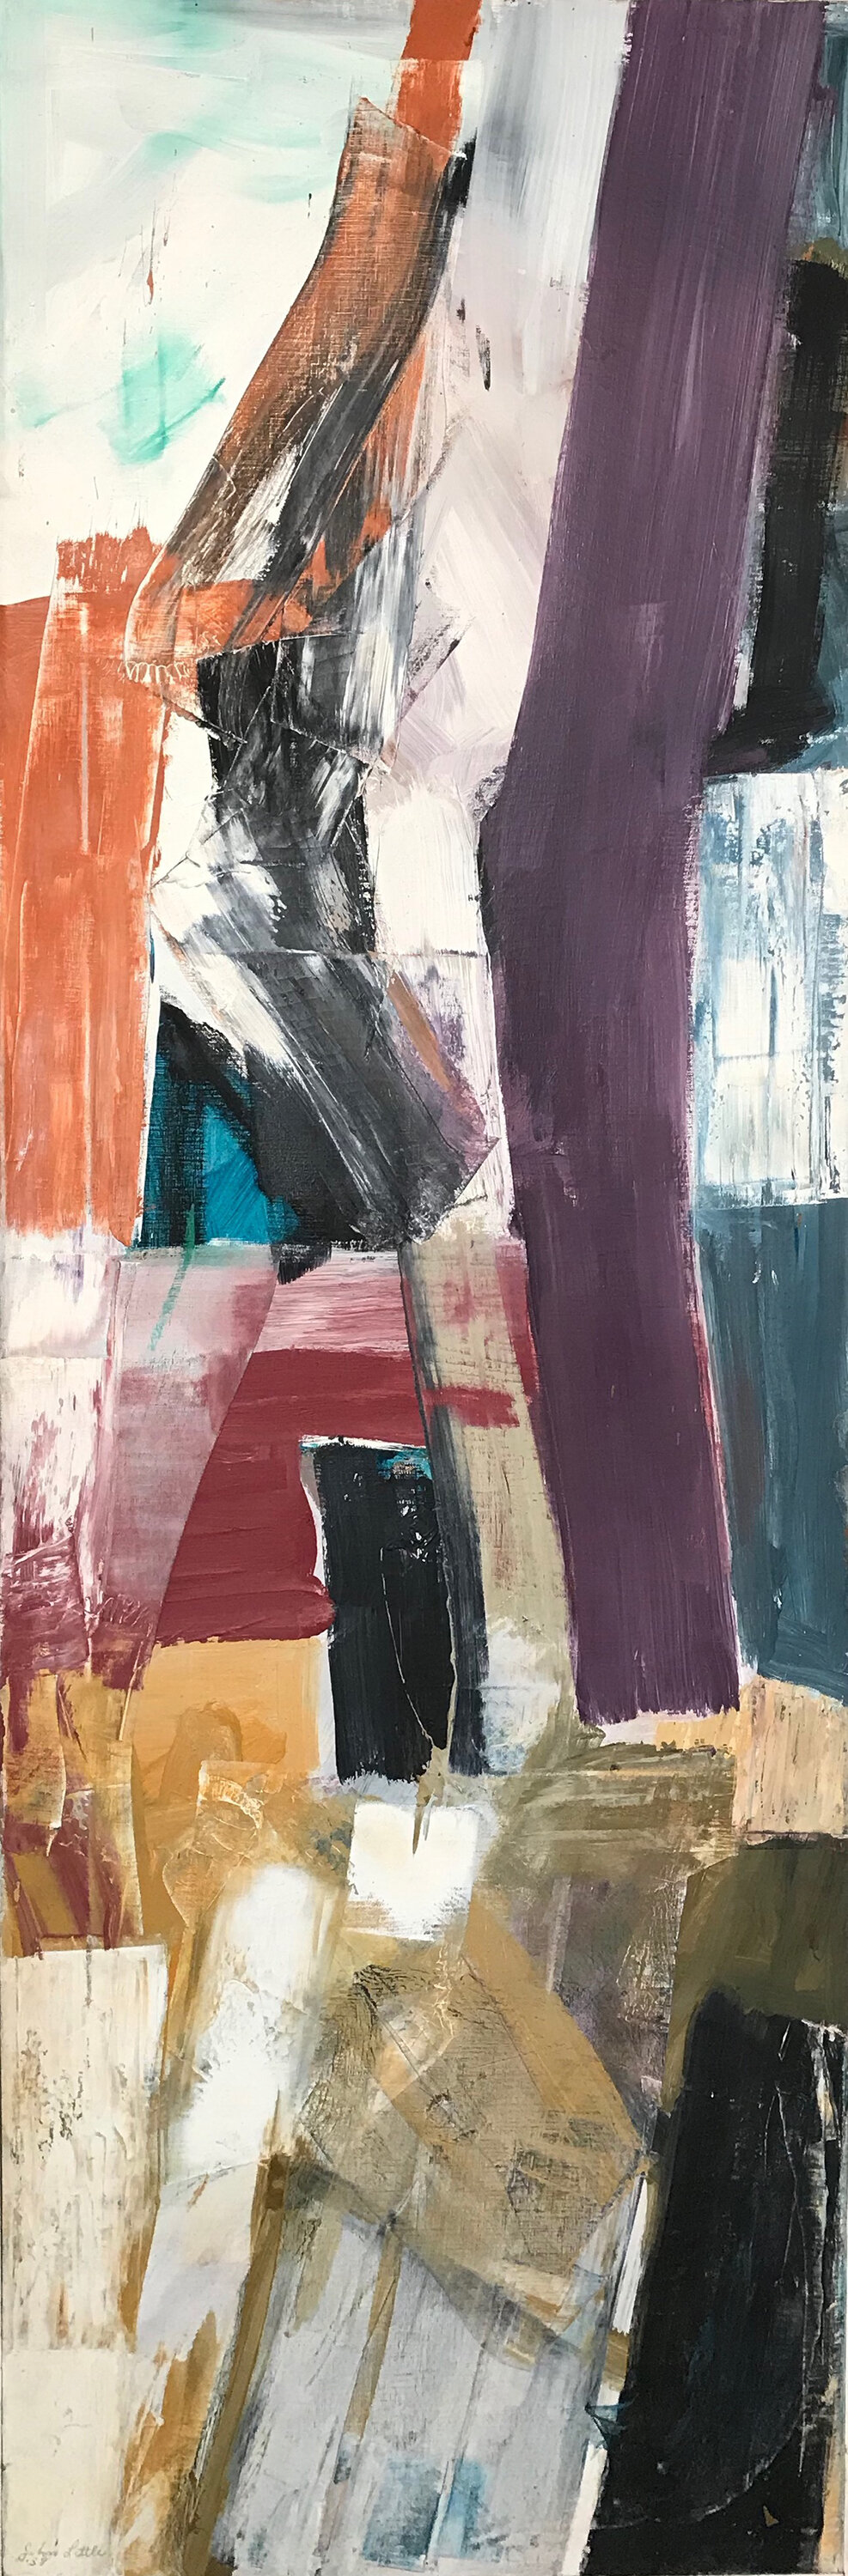  John Little Untitled 1958 Oil on canvas 81 x 27 inches